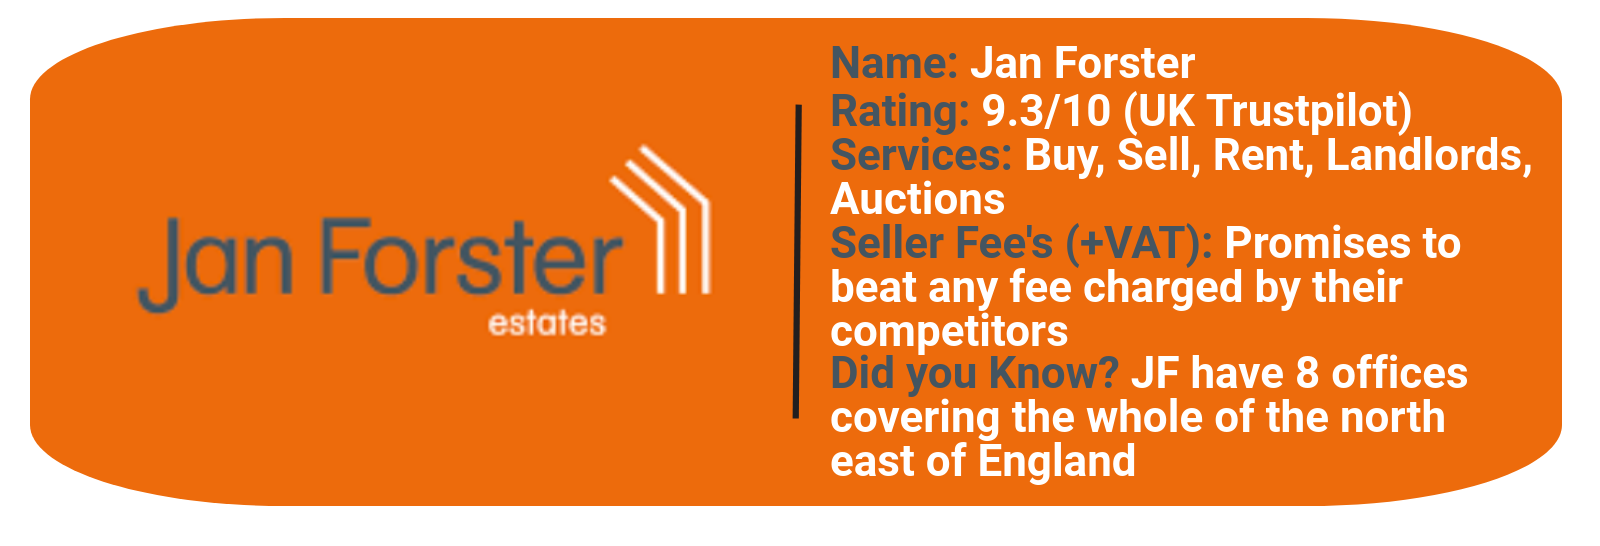 Jan Forster statistics featuring rating, services & seller fee's